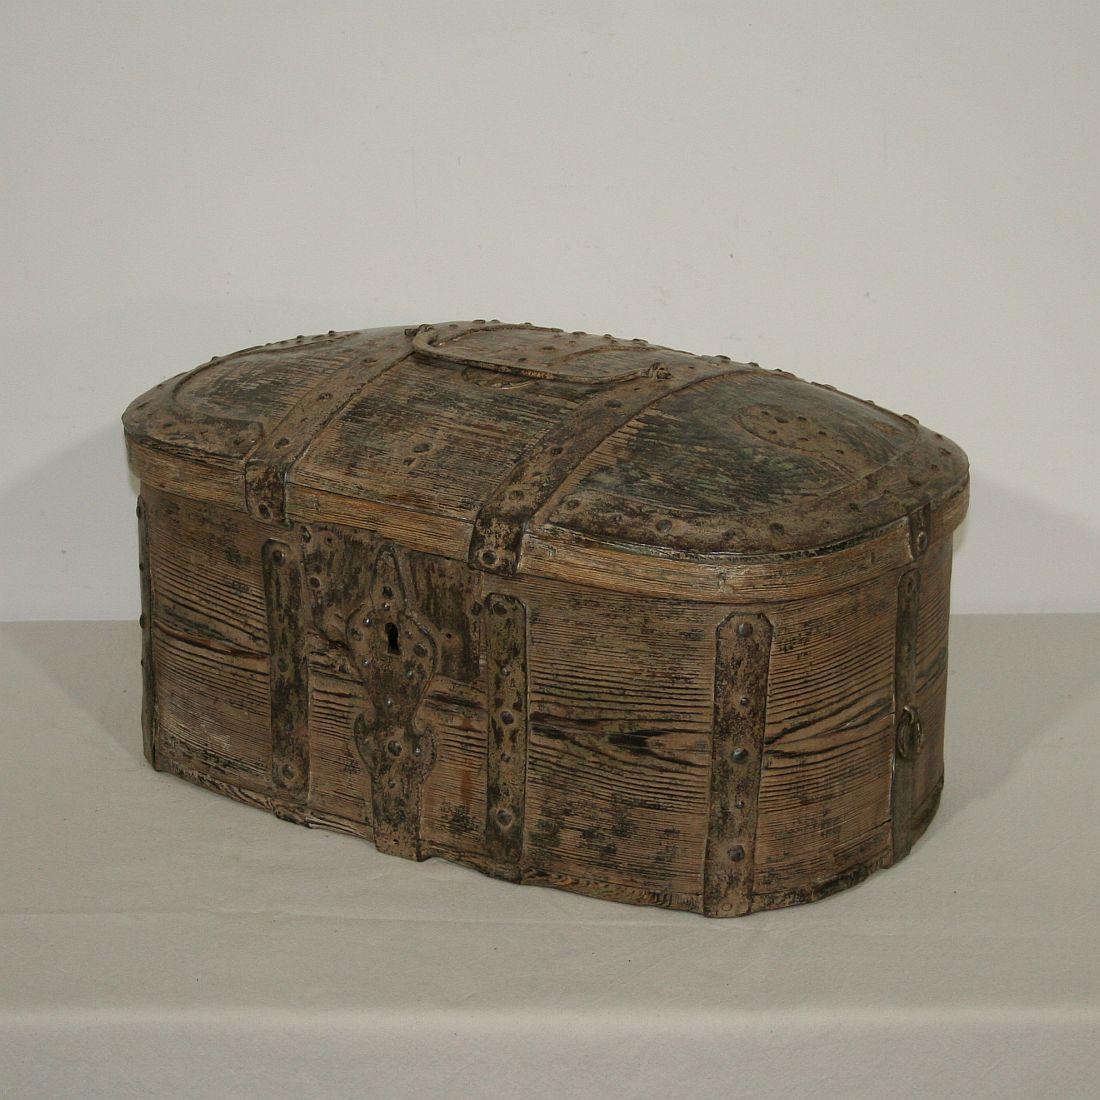 Rare Swedish travel box with stunning patina and hand forged iron details.
Sweden, circa 1750. Weathered, old repairs and small losses.
More pictures available on request.
   